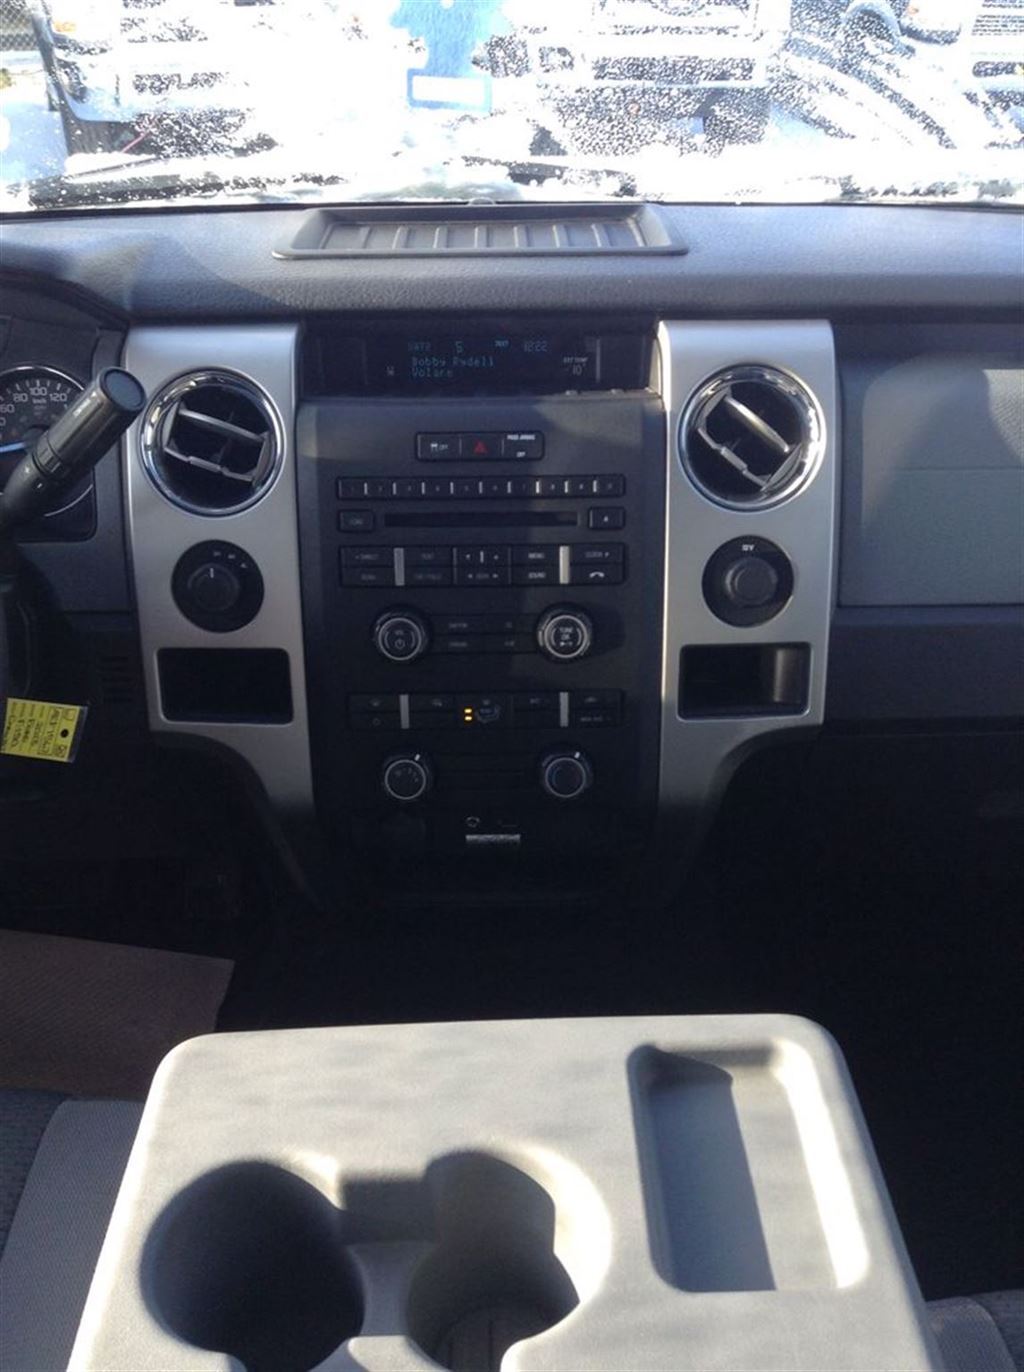 Used 2013 Ford F-150 in Edmonton,AB